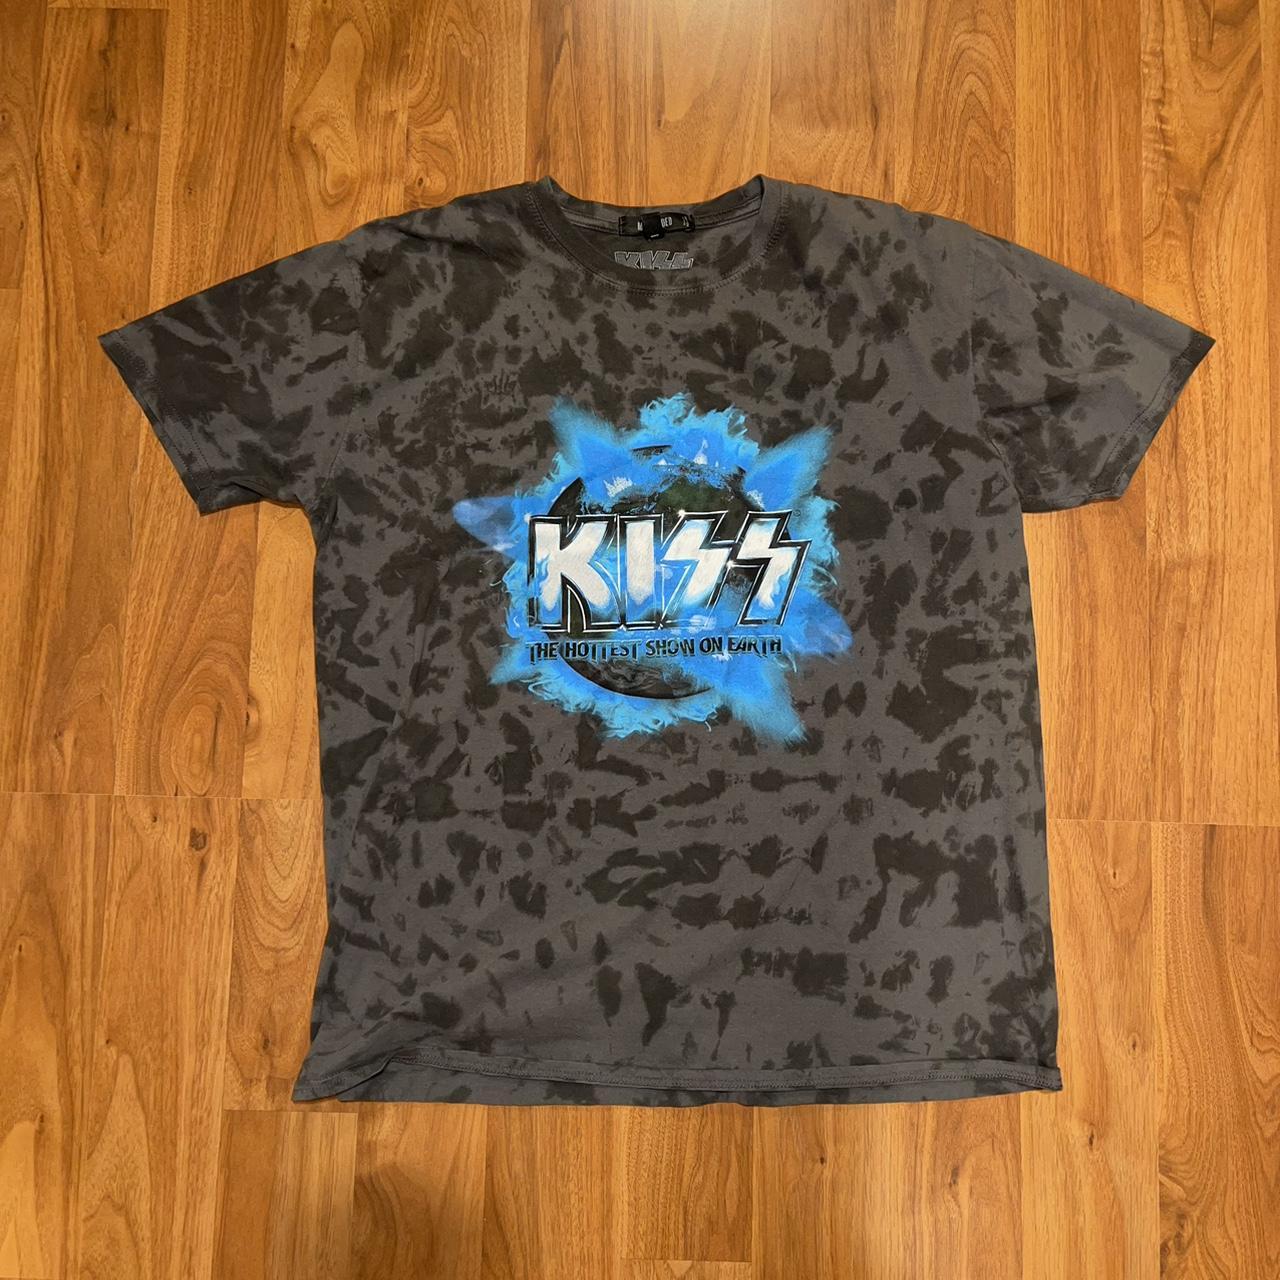 KISS - Hottest Show On Earth T-Shirt - Shirtstore